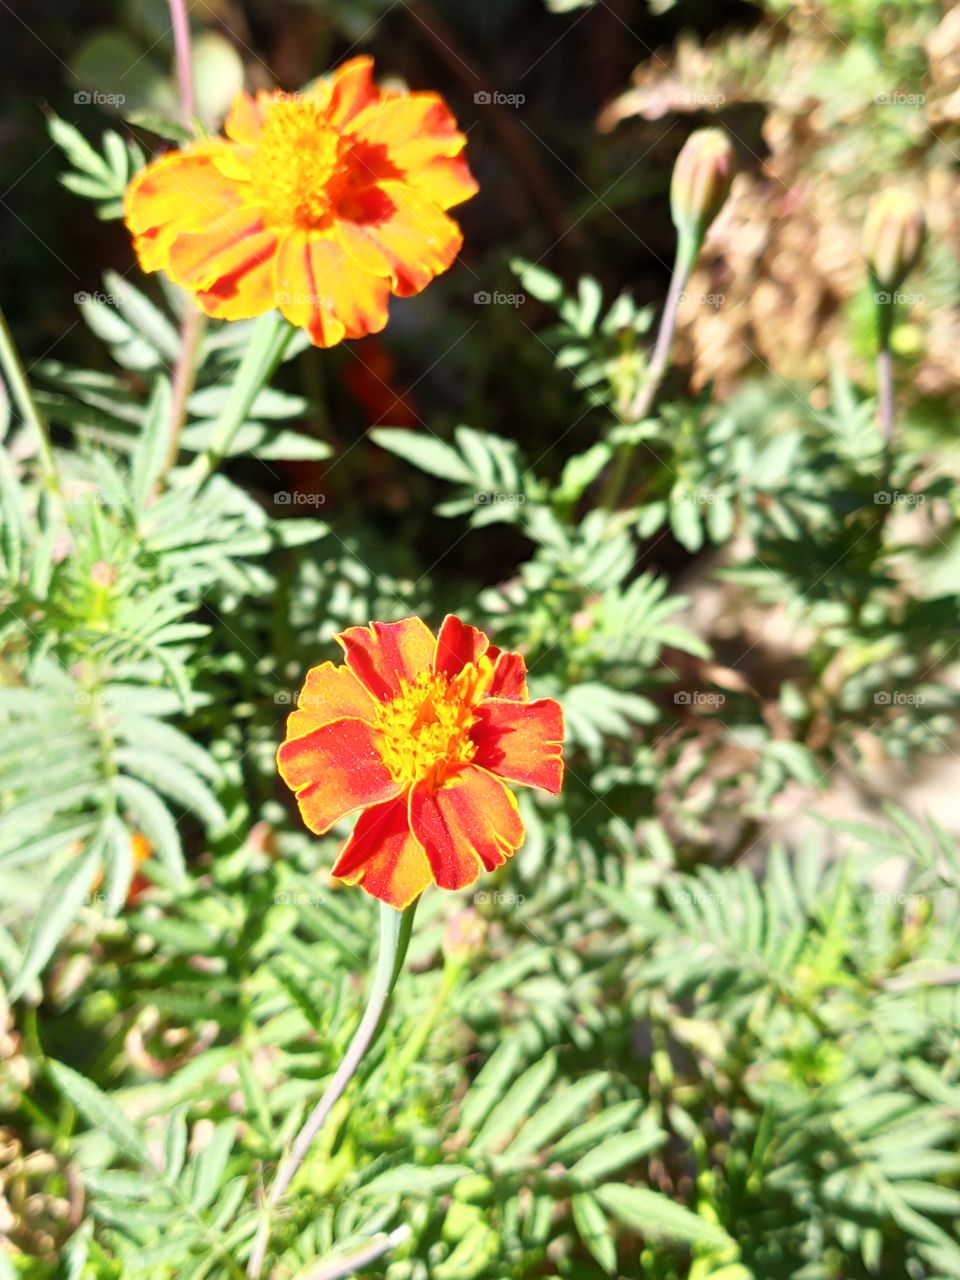 red and orange flower with green leaves in